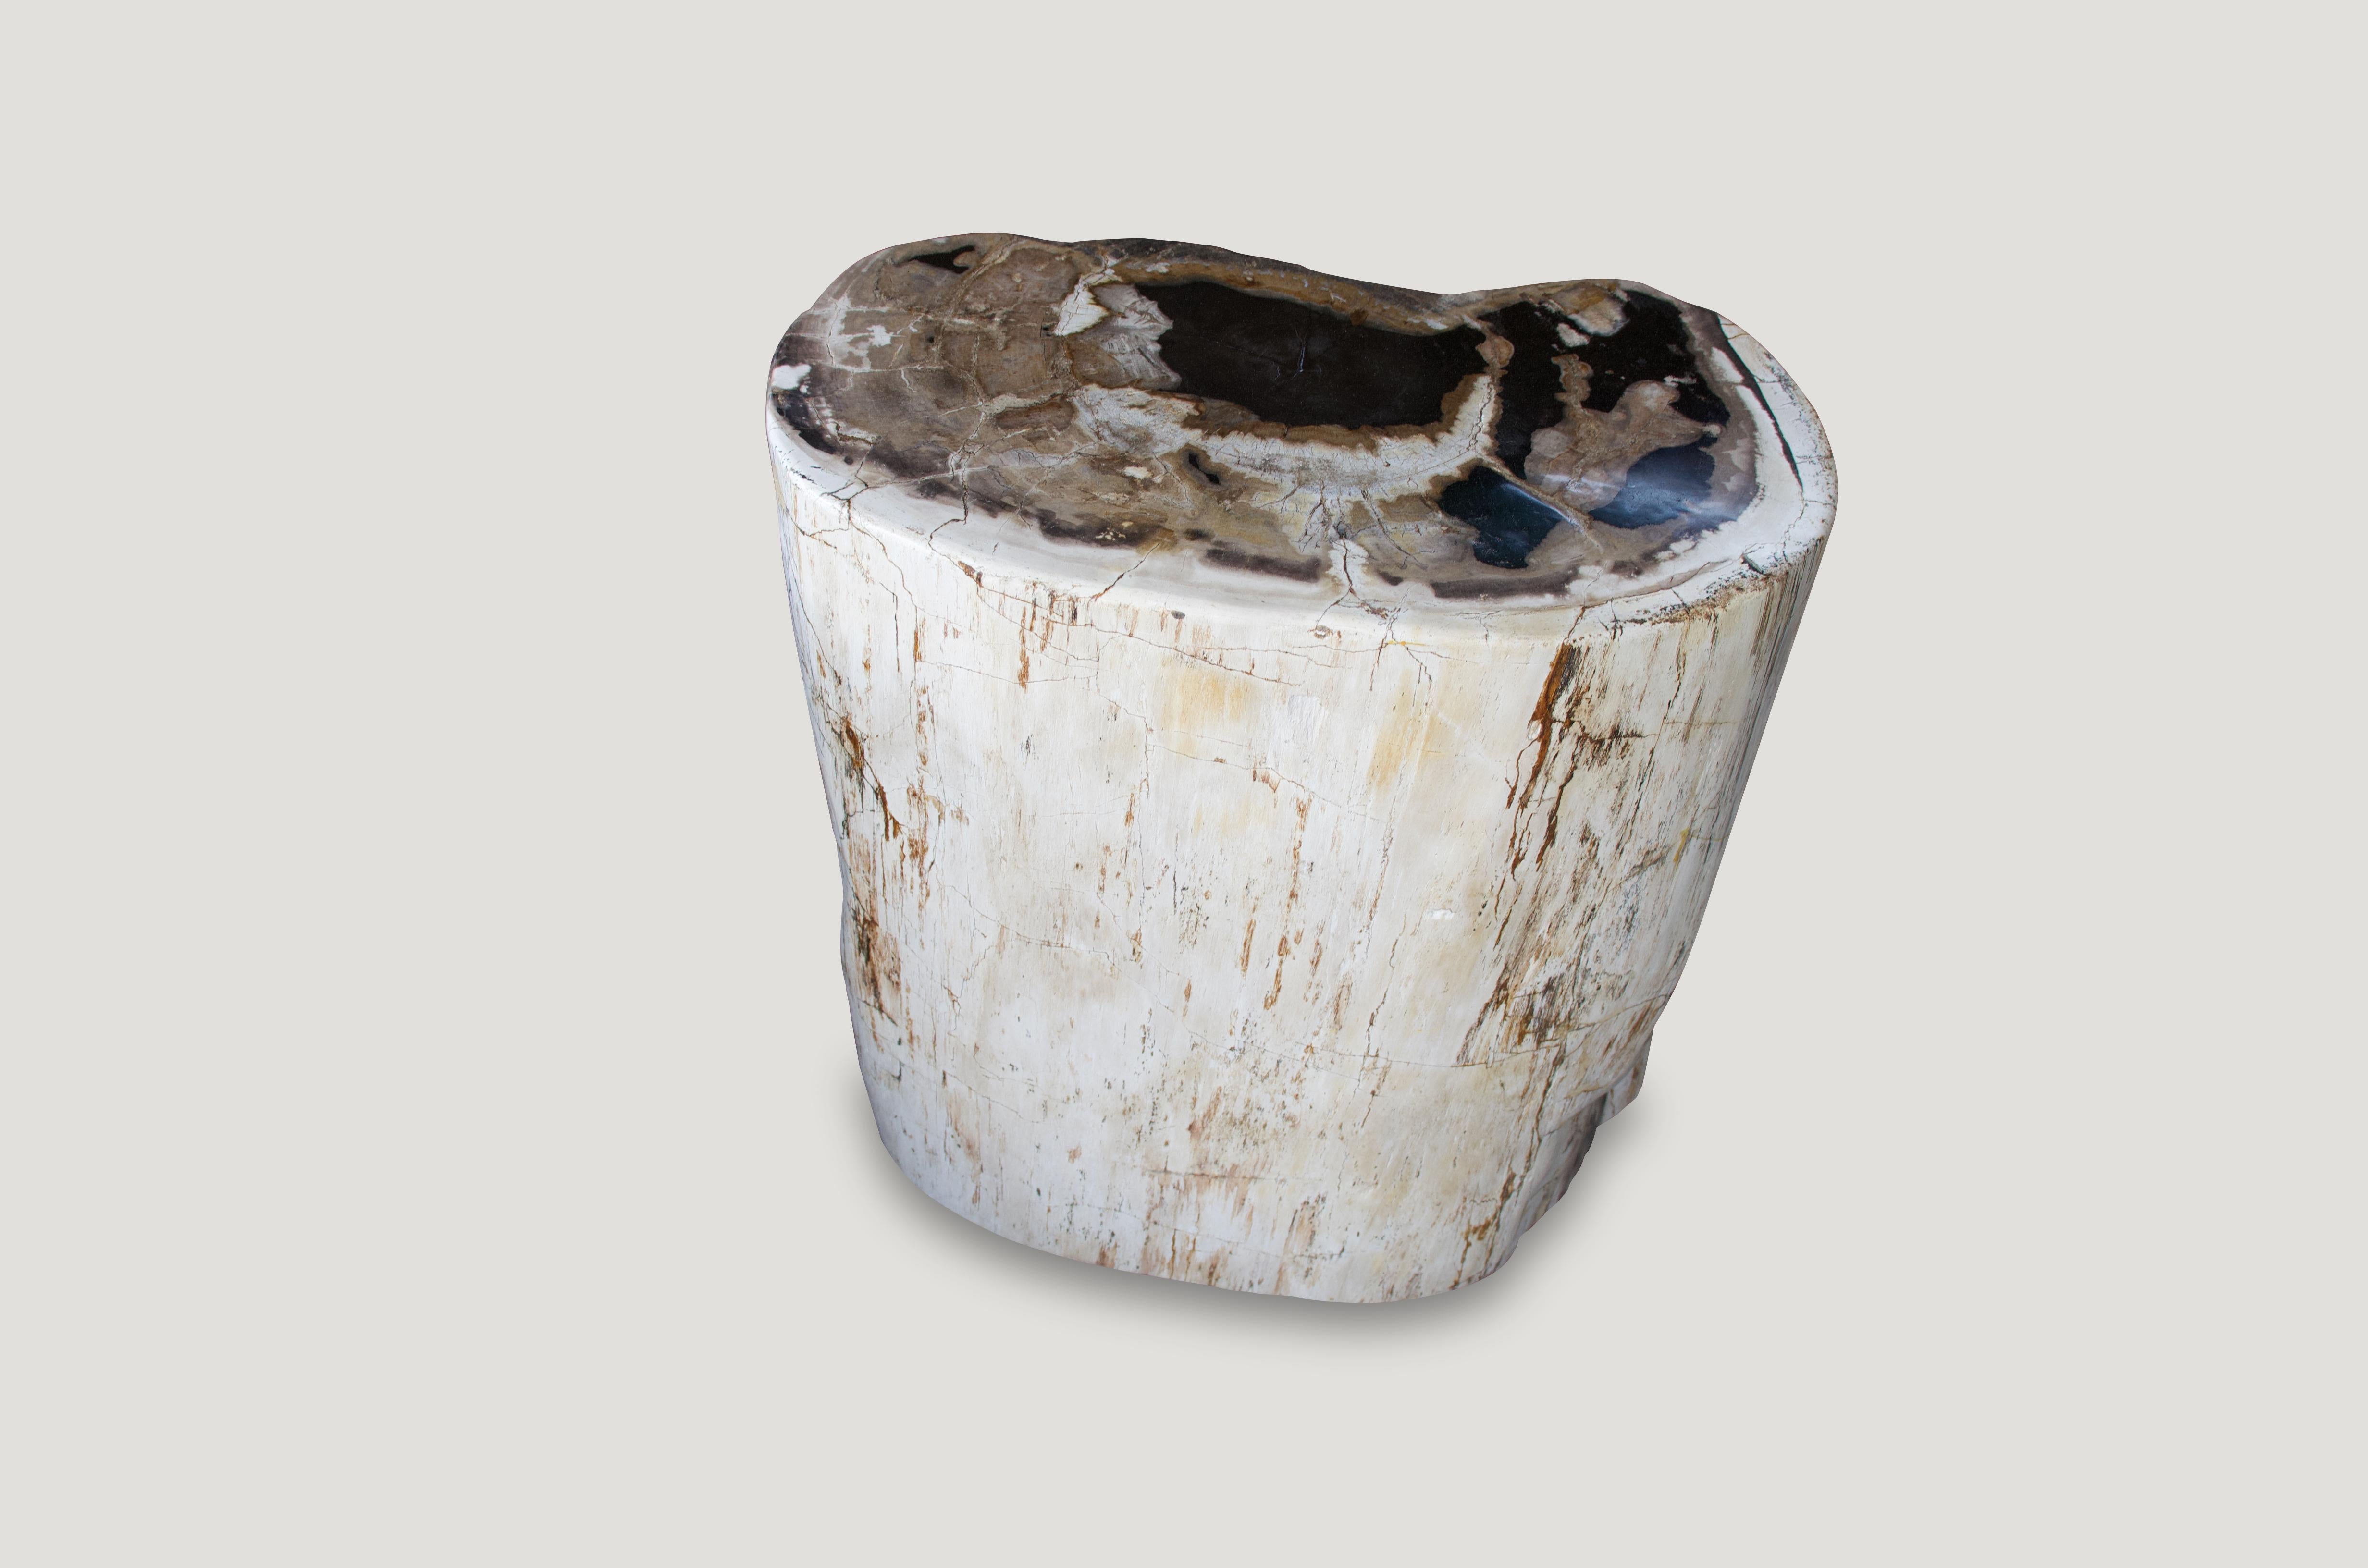 Fabulous shape on this contrasting earth toned high quality petrified wood side table.

As with a diamond, we polish the highest quality fossilized petrified wood, using our latest ground breaking technology, to reveal its natural beauty and